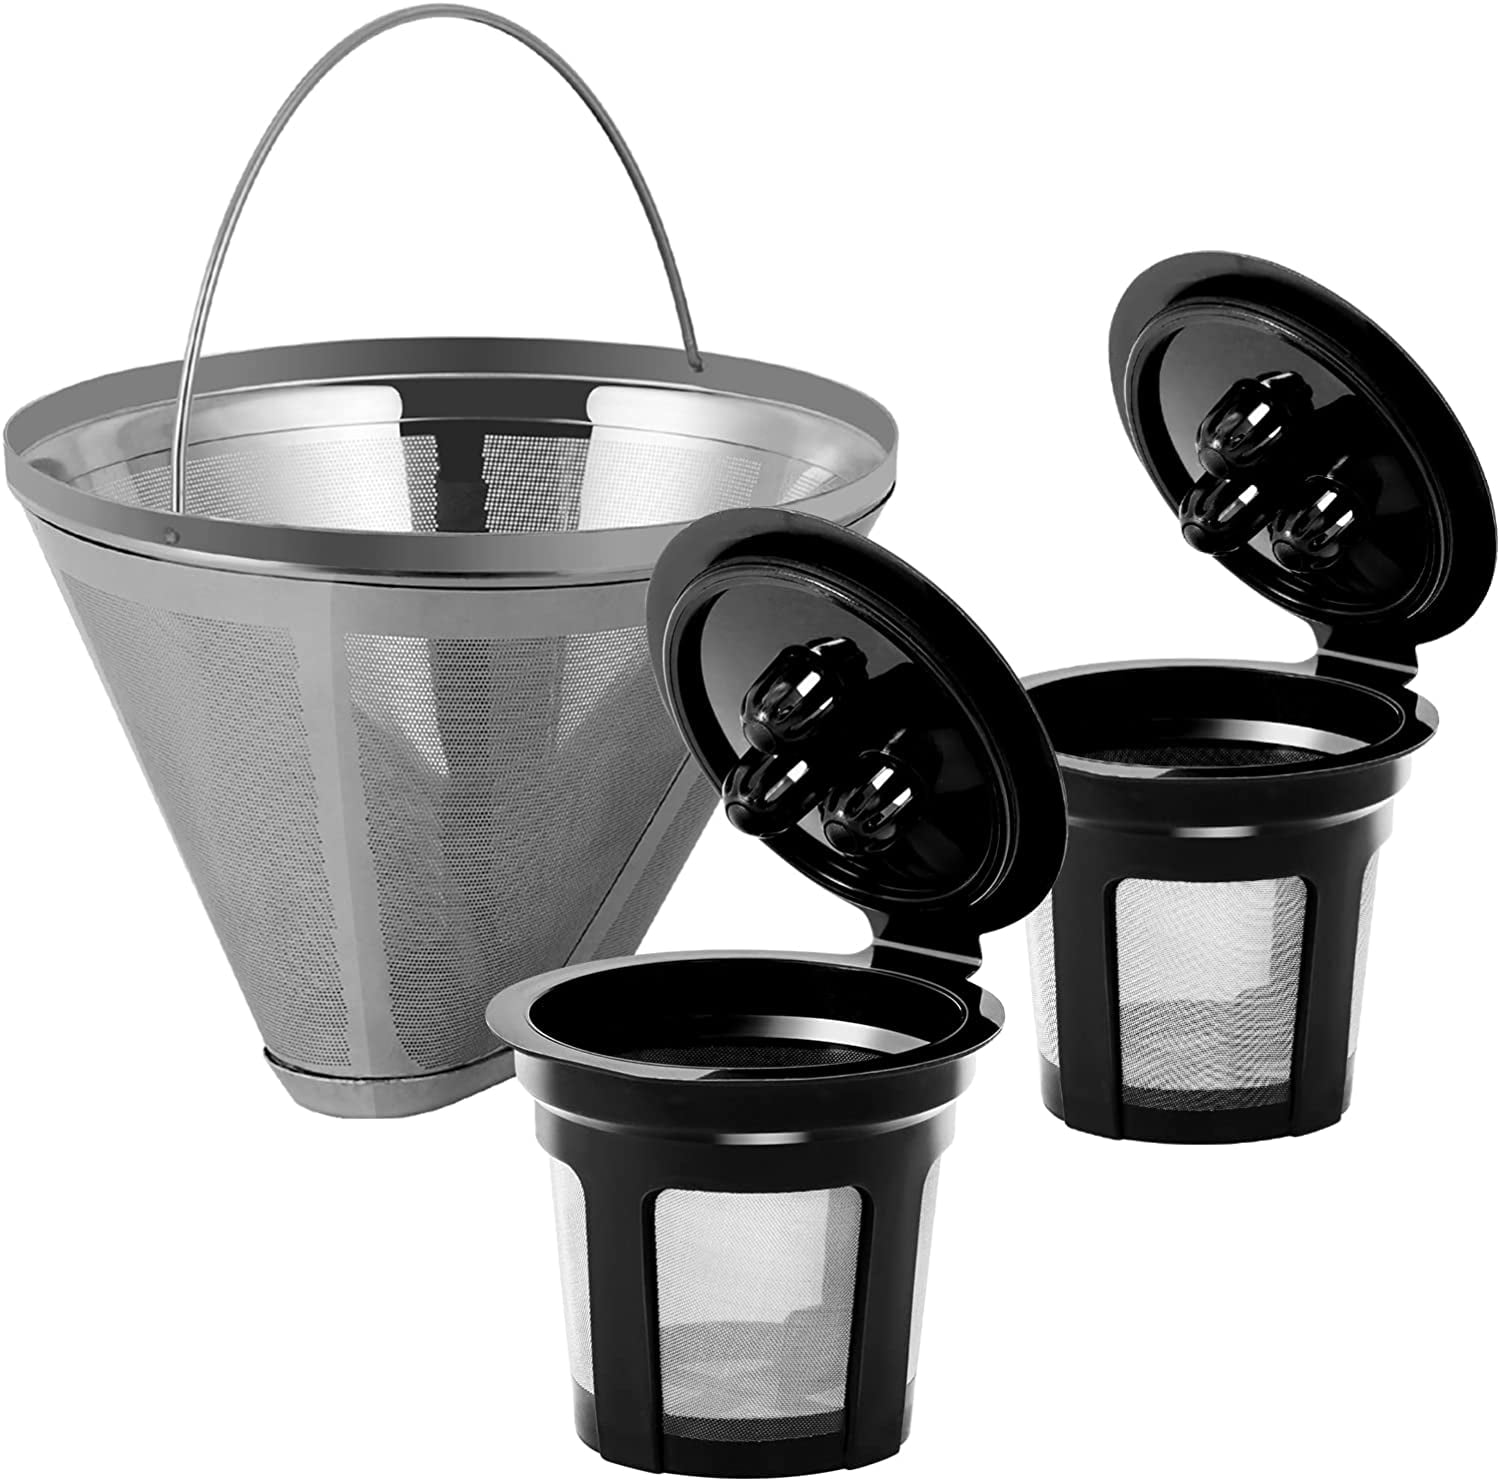 Stainless Steel Reusable Coffee Filters Basket 8-12 Cup Sturdy Permanent  Coffee Filter fit for Mr. Coffee Black & Decker Coffee Makers